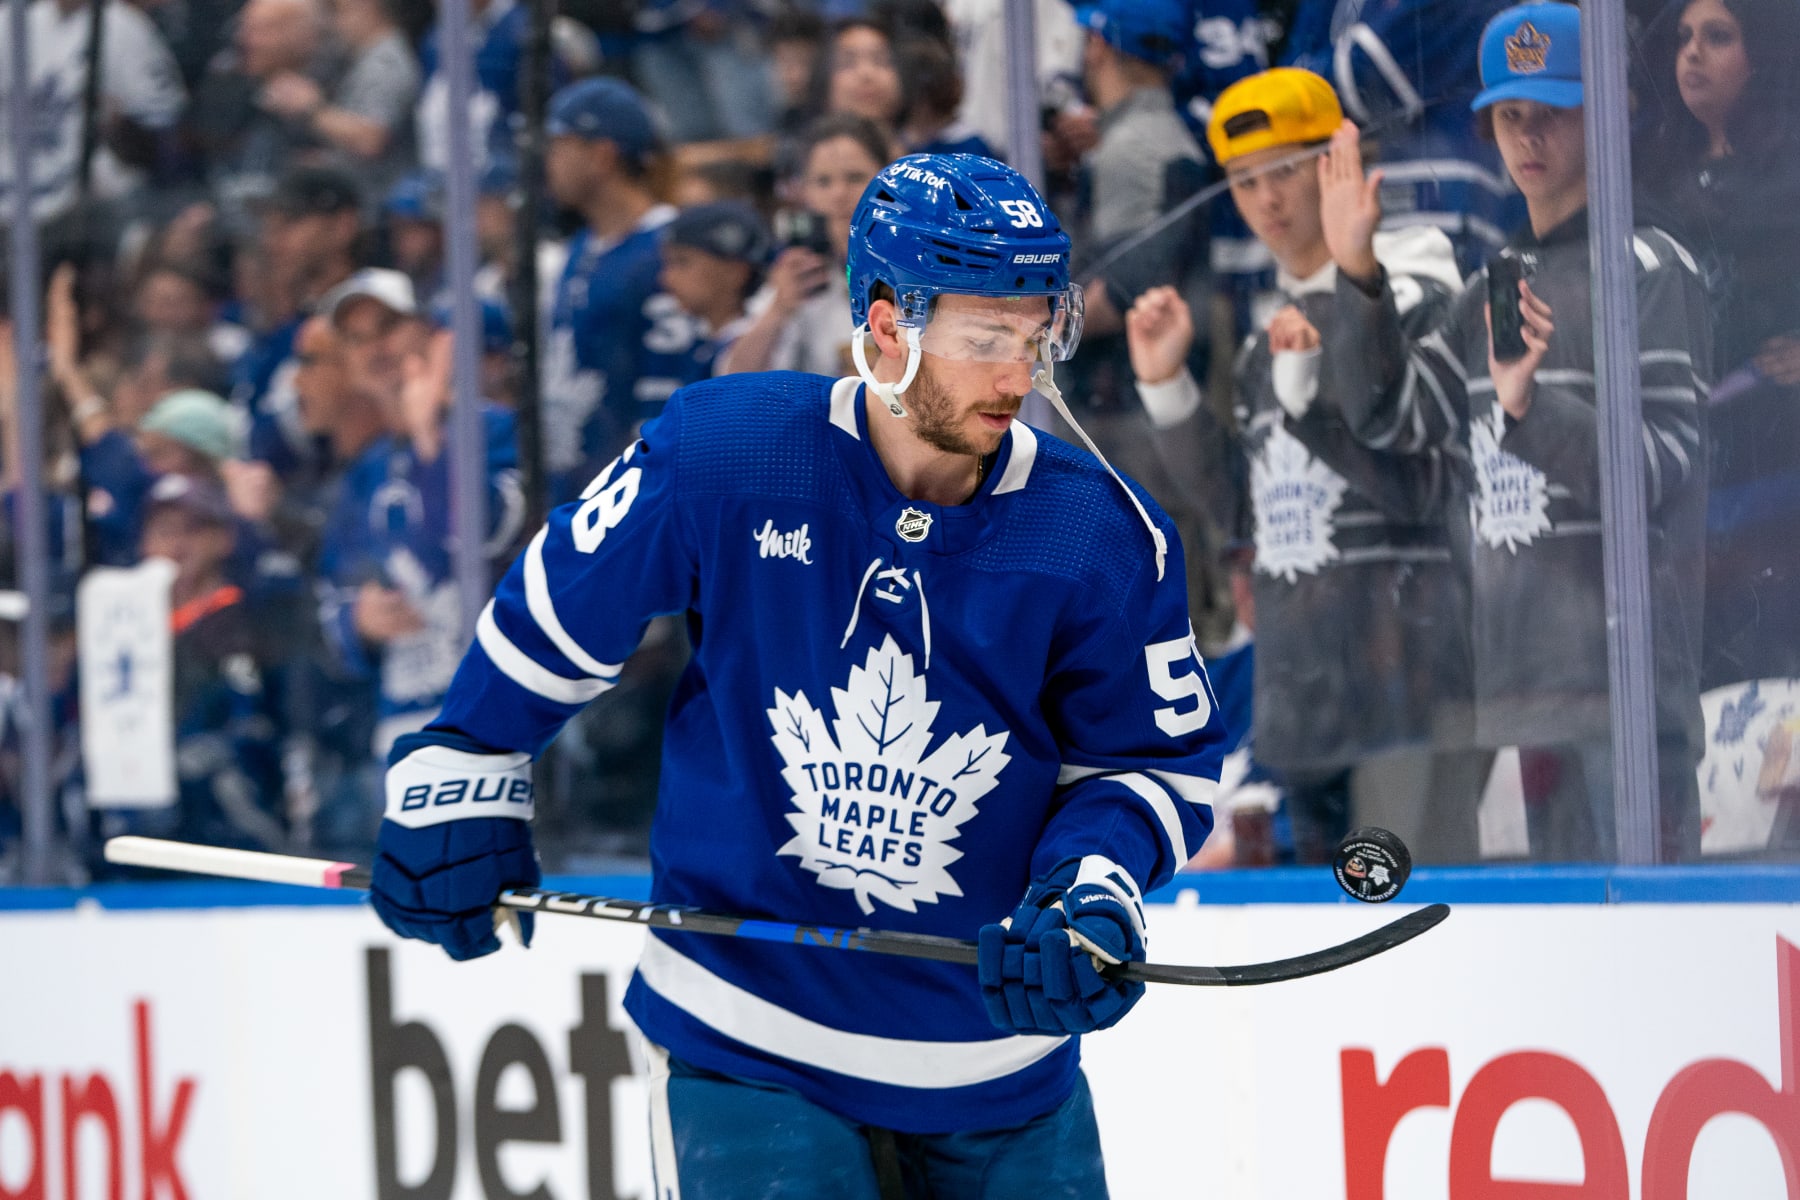 Leafs announce jersey numbers for Domi, Bertuzzi, and other